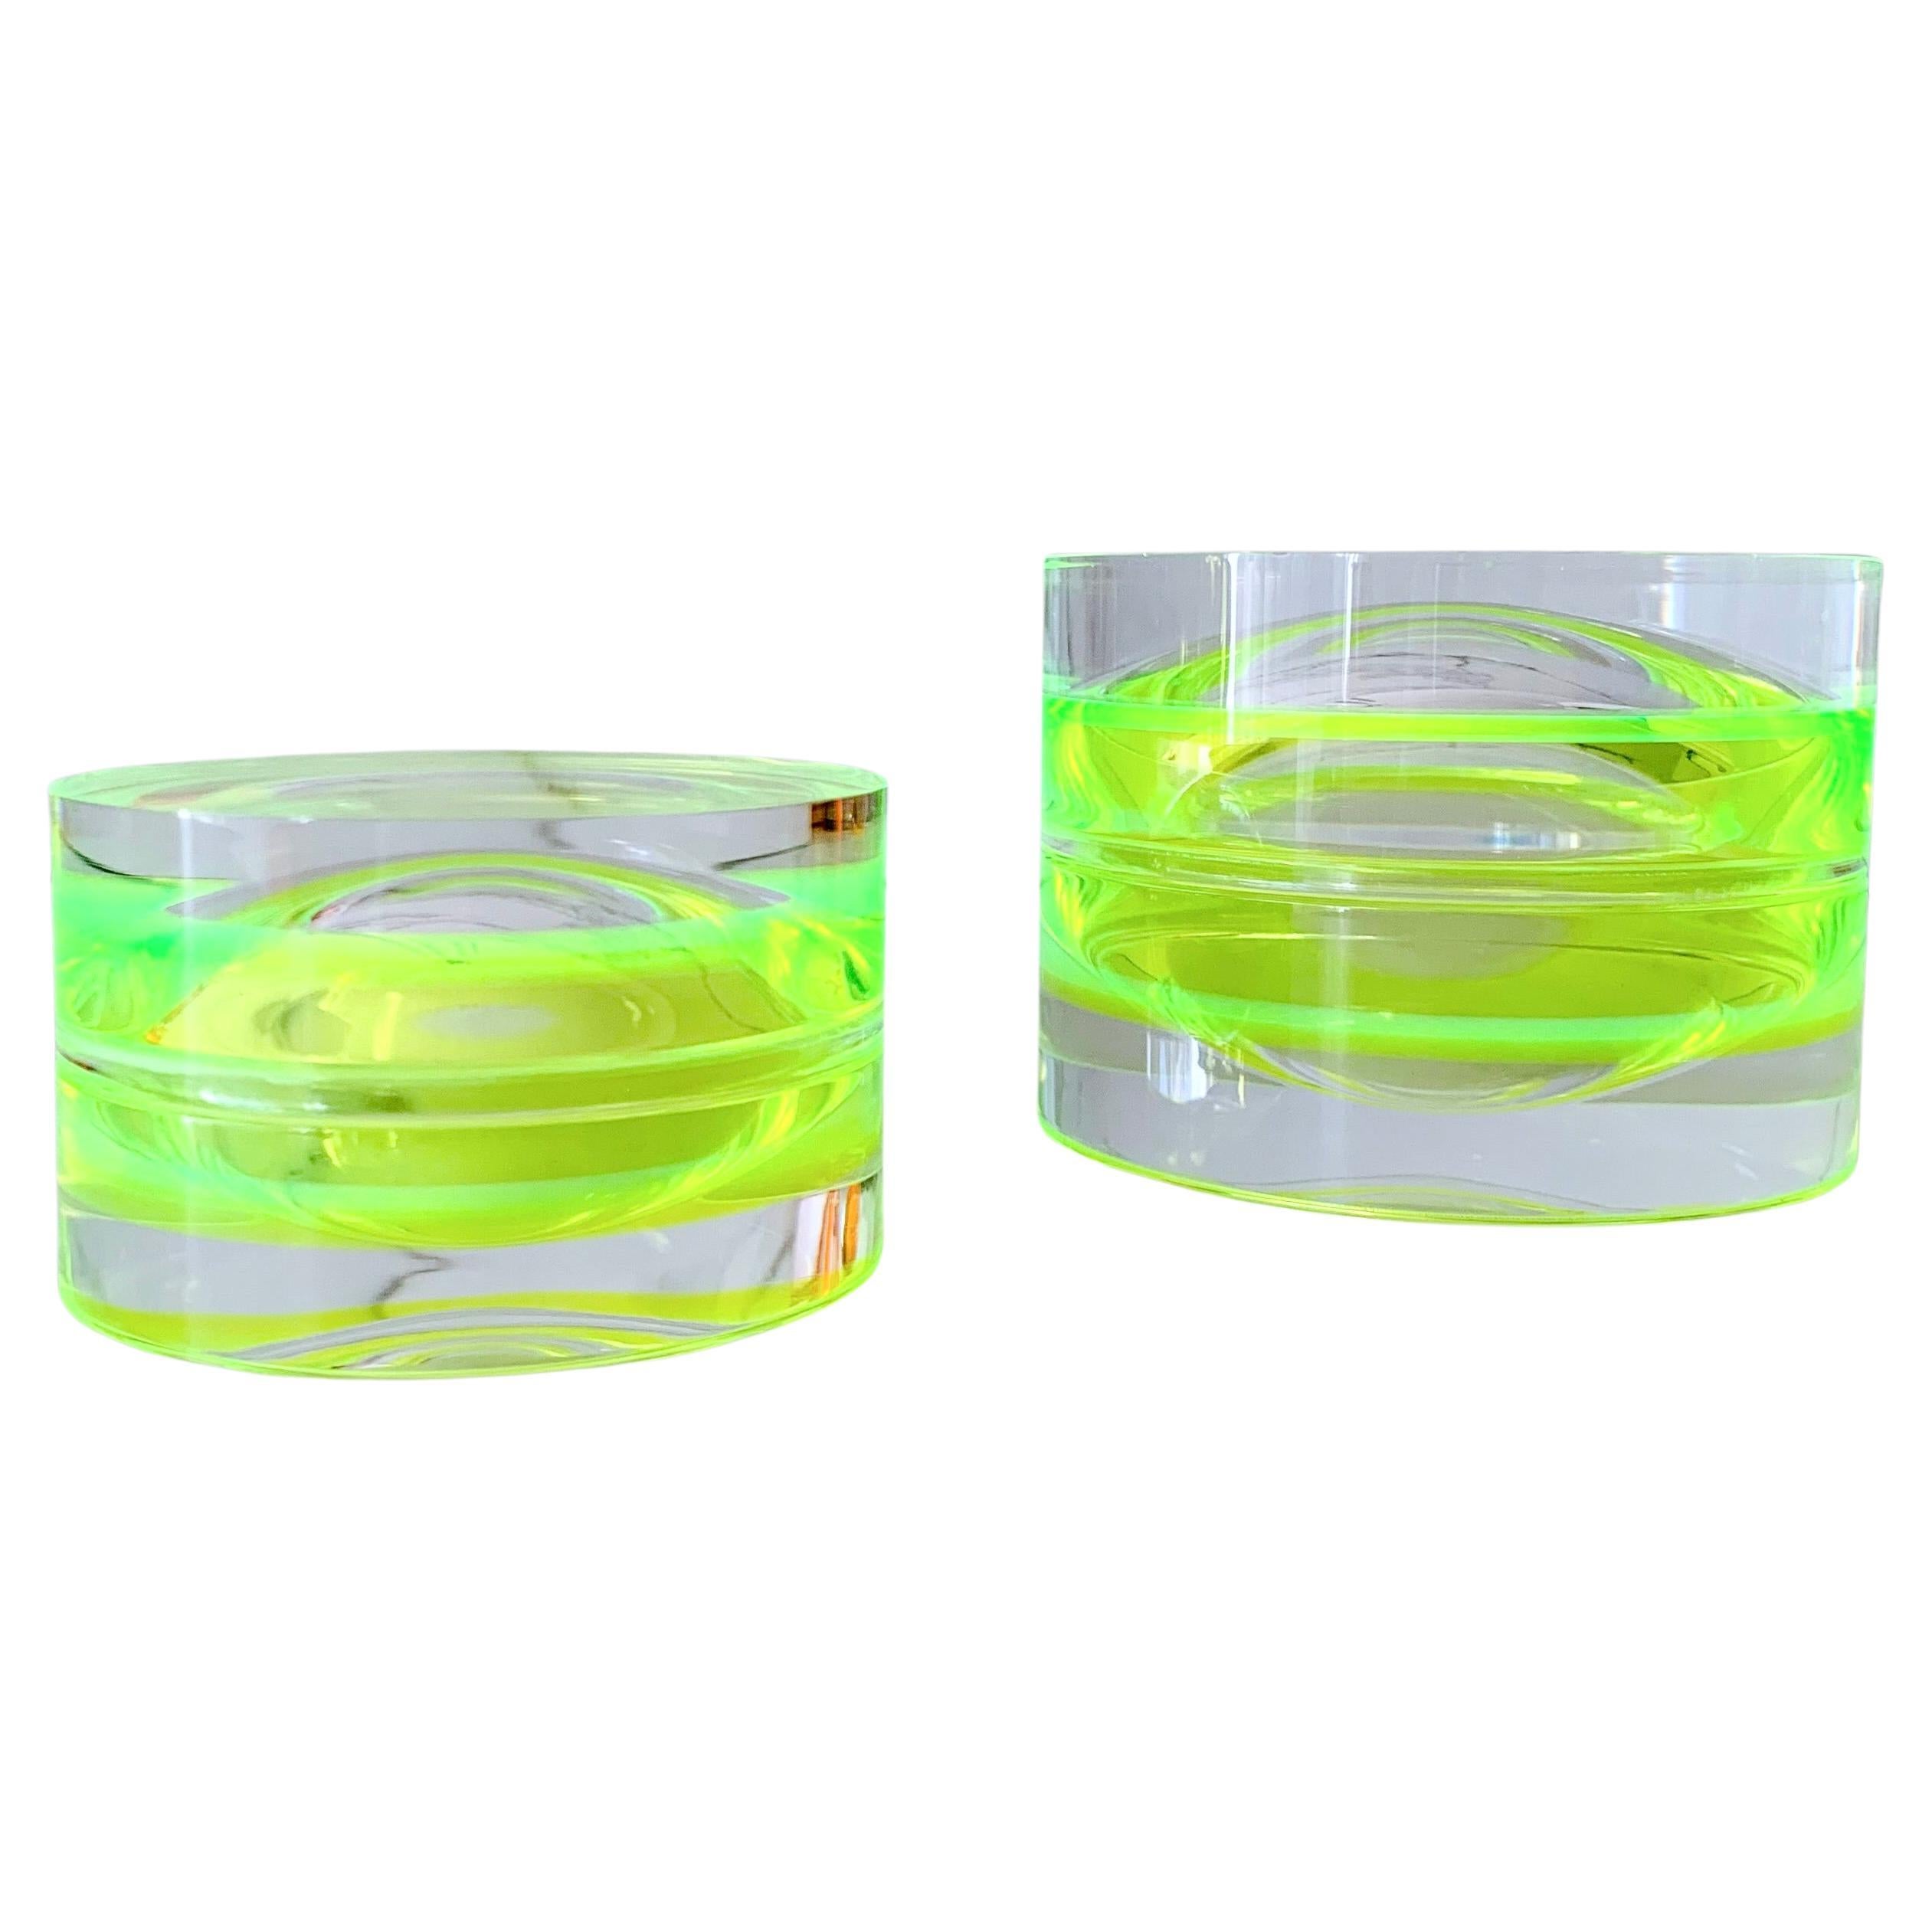 Neon Green Acrylic Small Round Box by Paola Valle For Sale